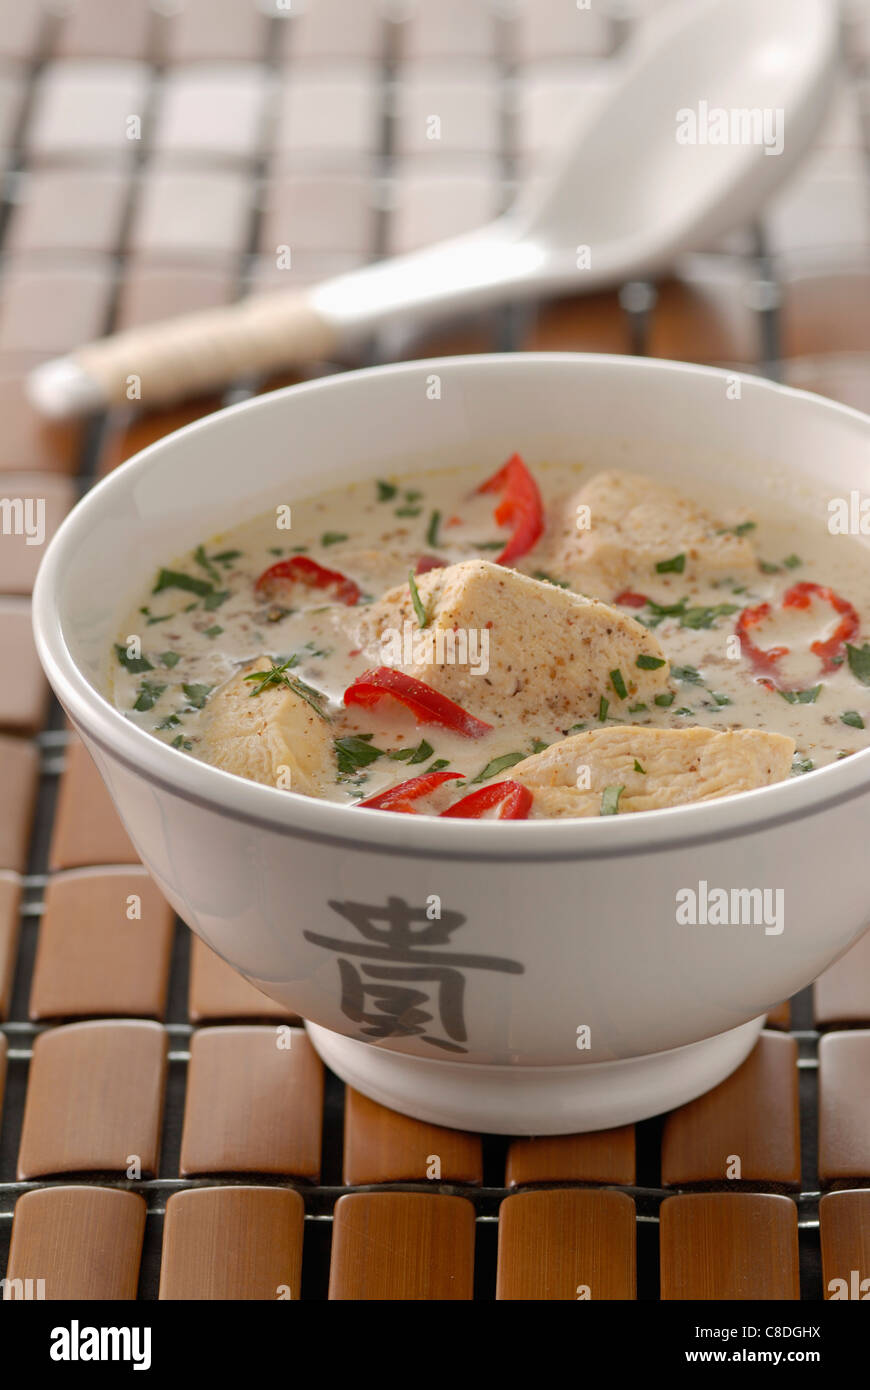 Chicken and coconut milk Thai soup Stock Photo